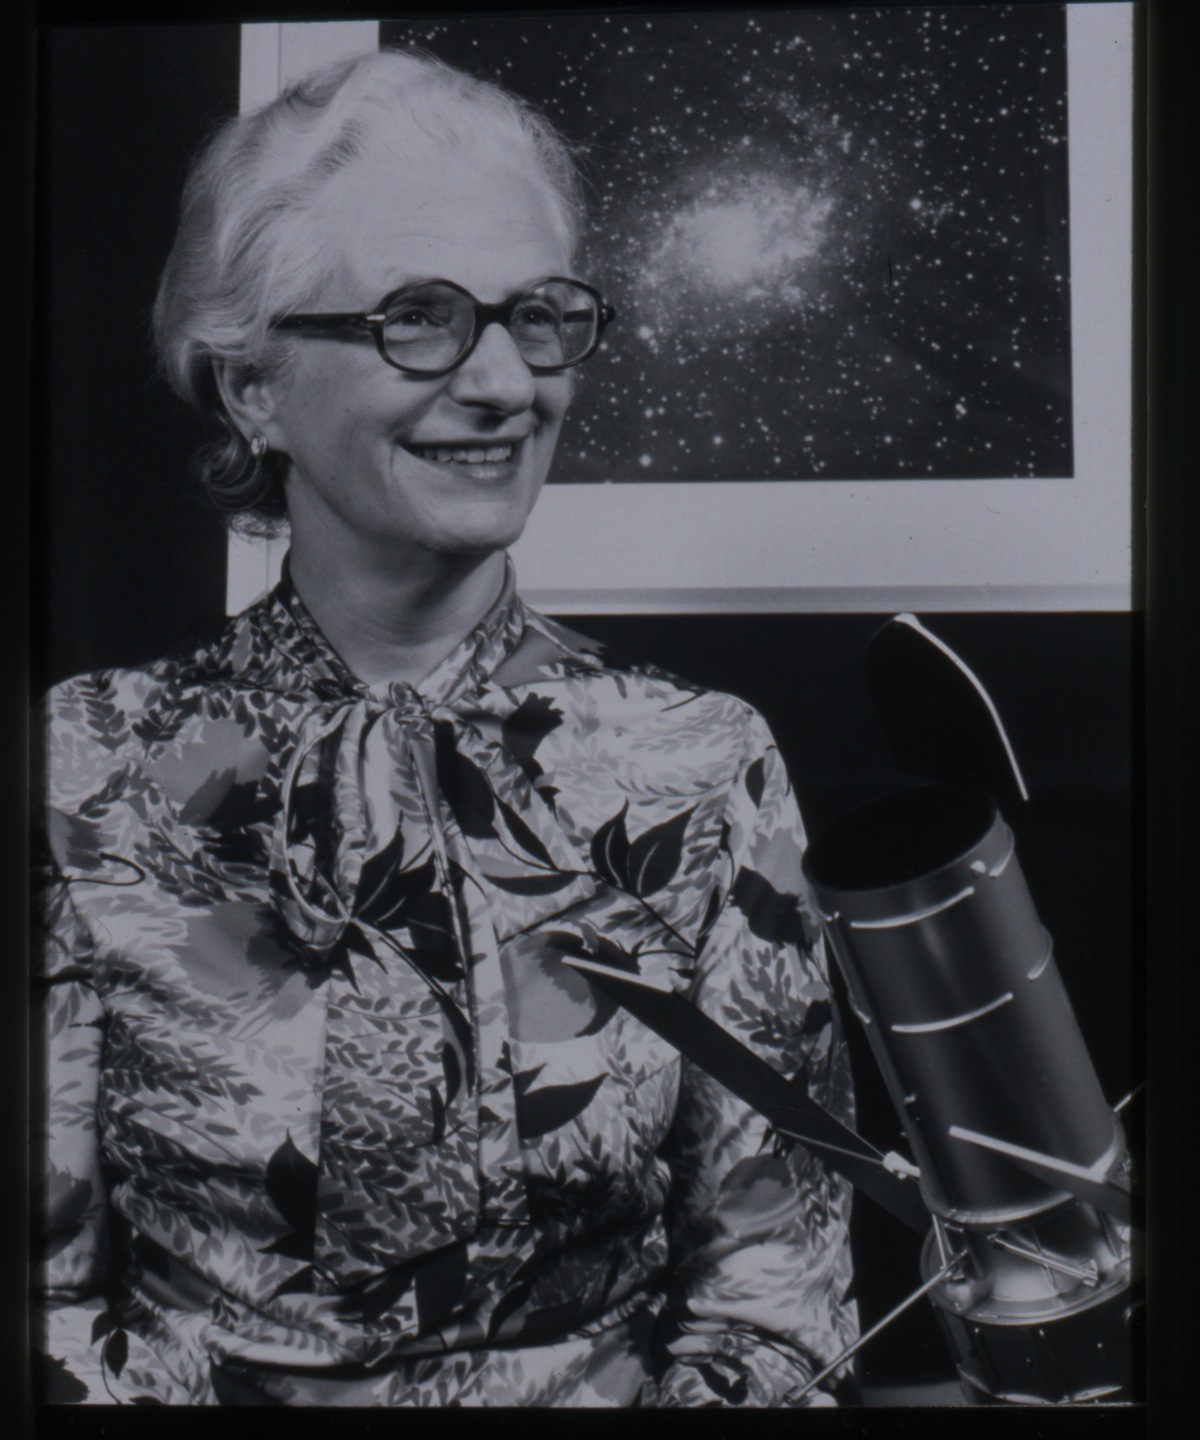 Dr. Nancy Grace Roman, chief of astronomy for NASA, is 